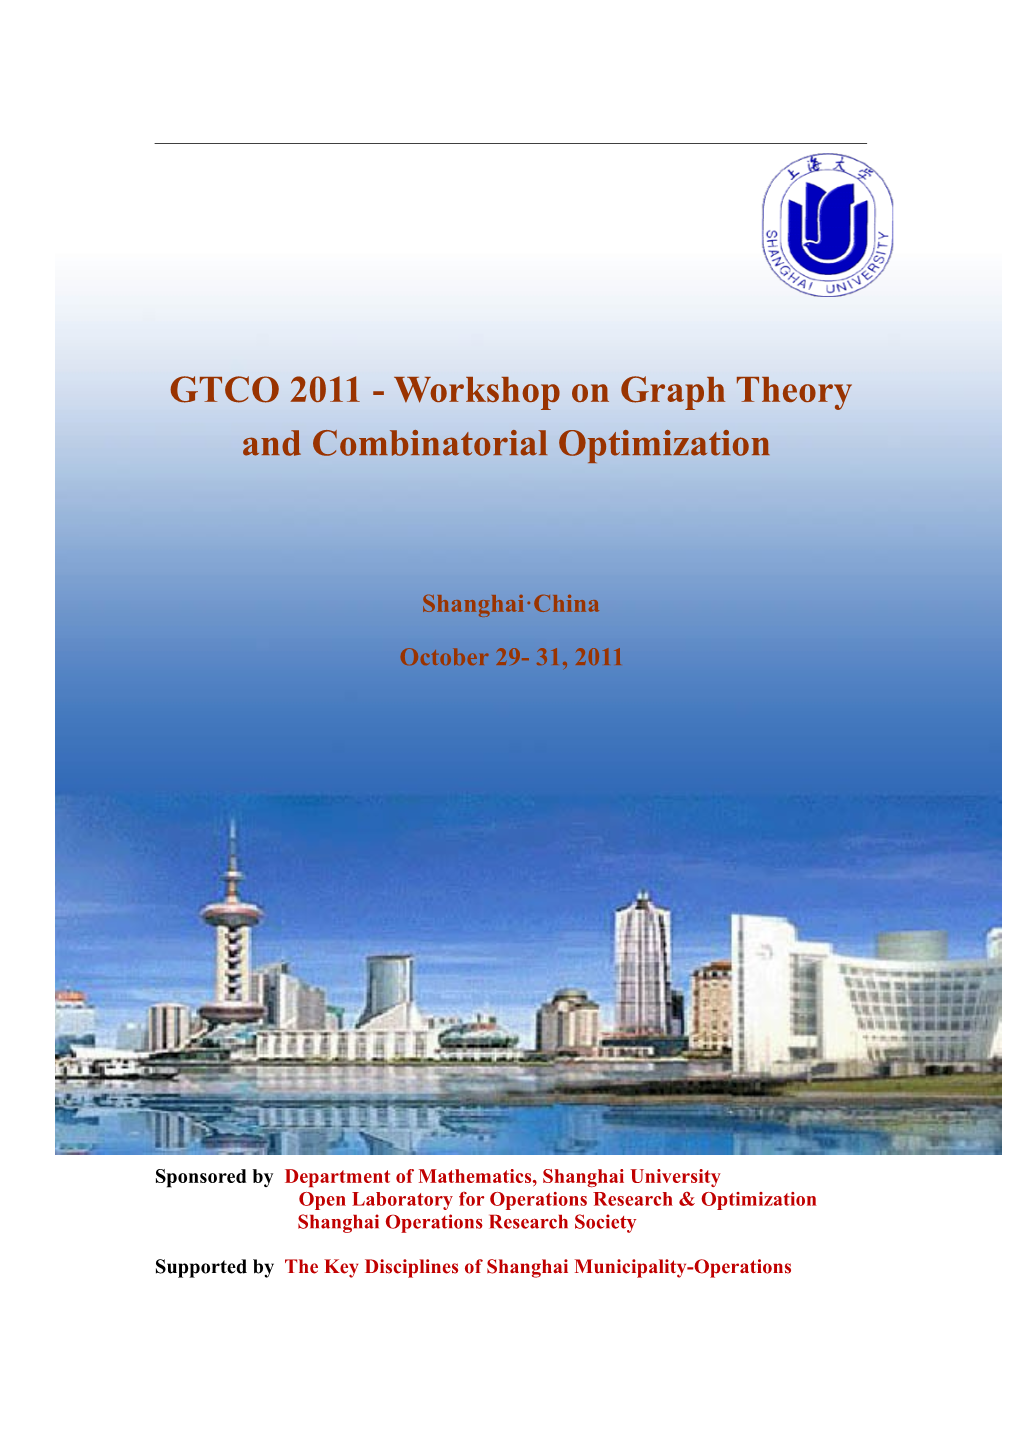 GTCO 2011 - Workshop on Graph Theory and Combinatorial Optimization